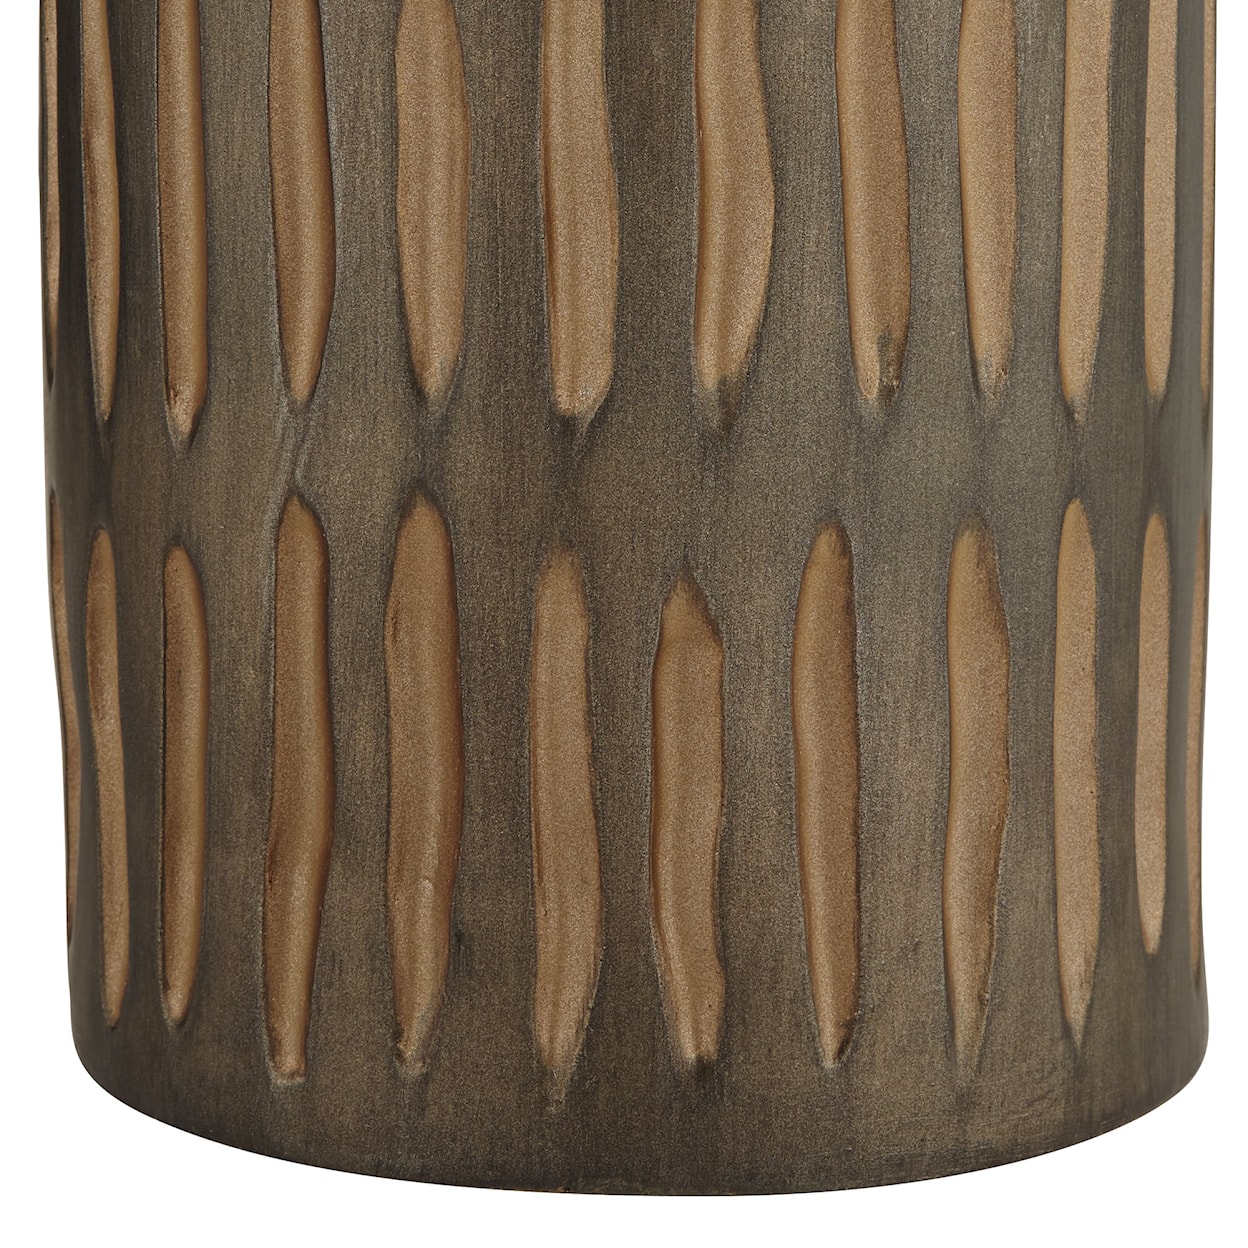 Pacific Coast Lighting Pacific Coast Lighting TL-Poly with hand carved pattern